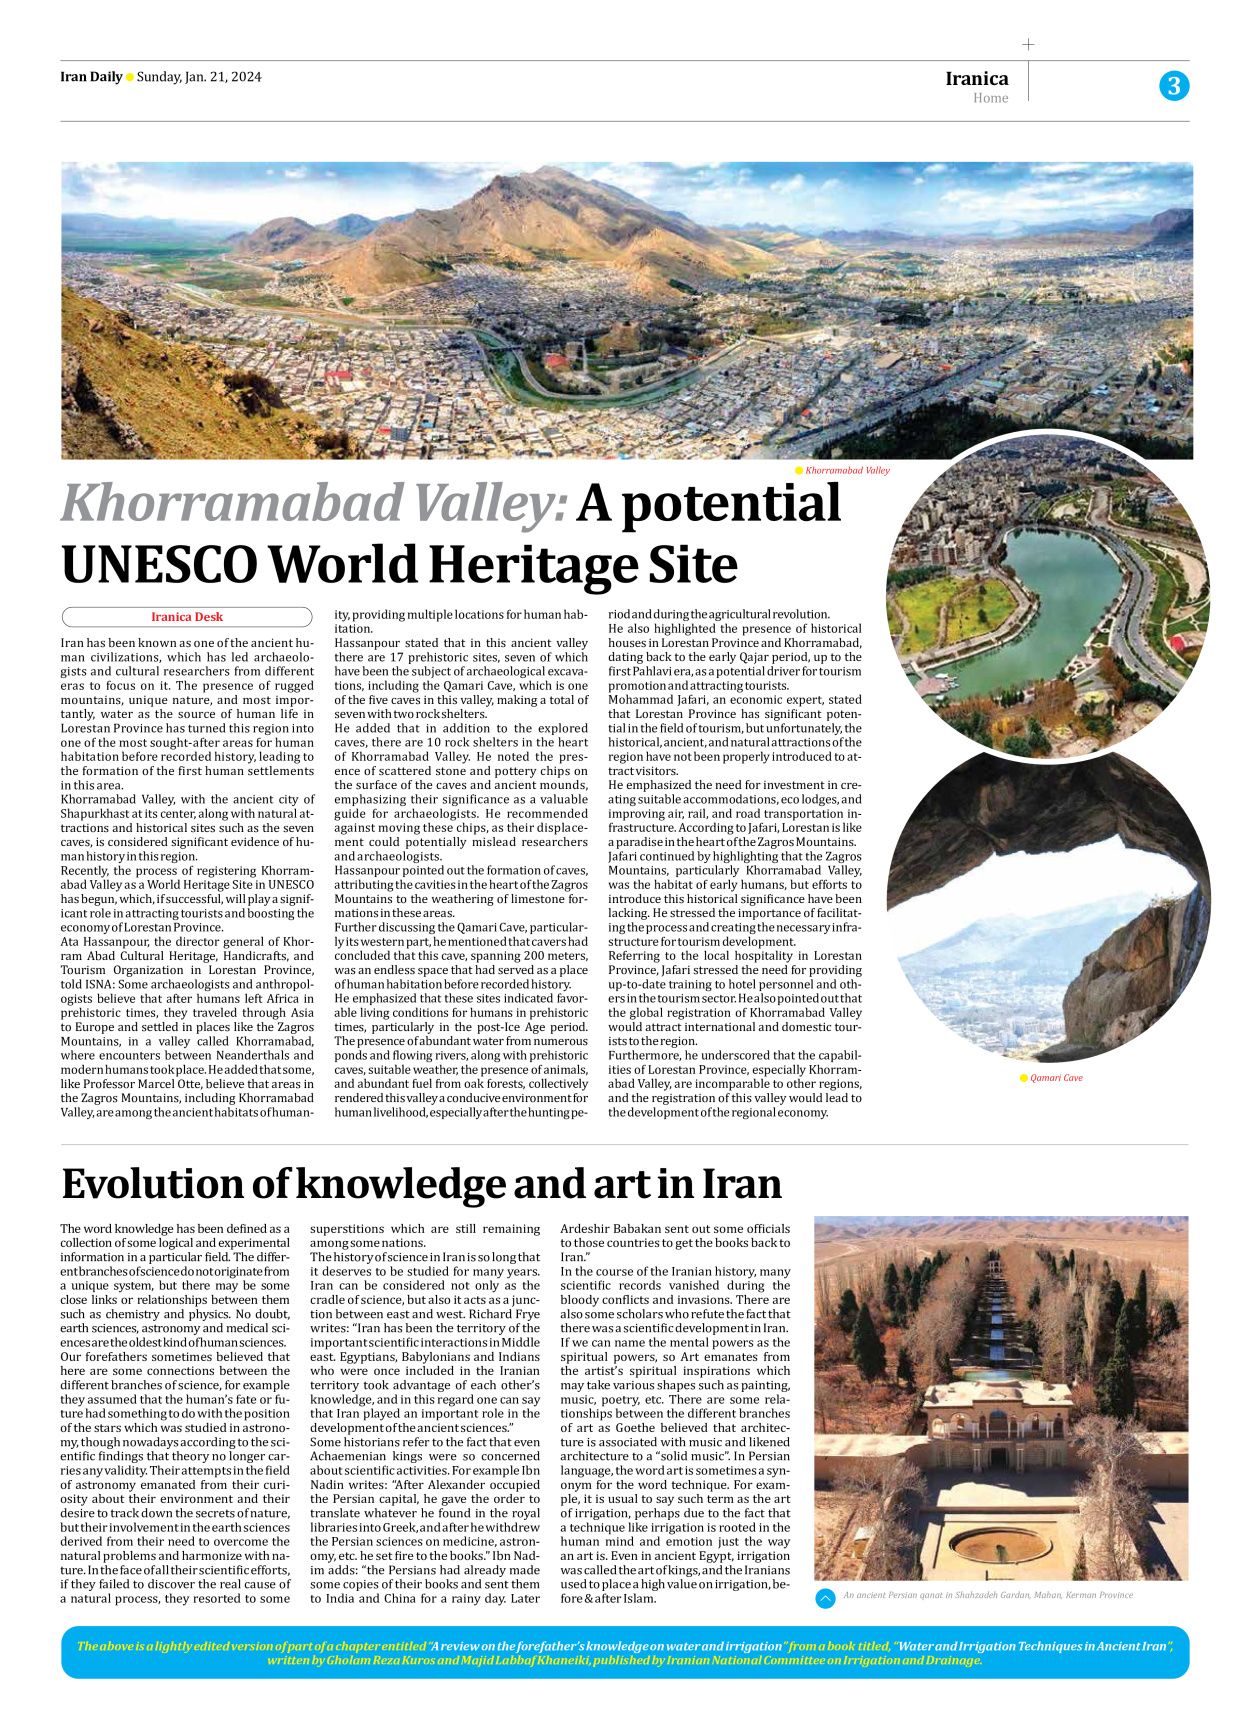 Iran Daily - Number Seven Thousand Four Hundred and Ninety - 21 January 2024 - Page 3